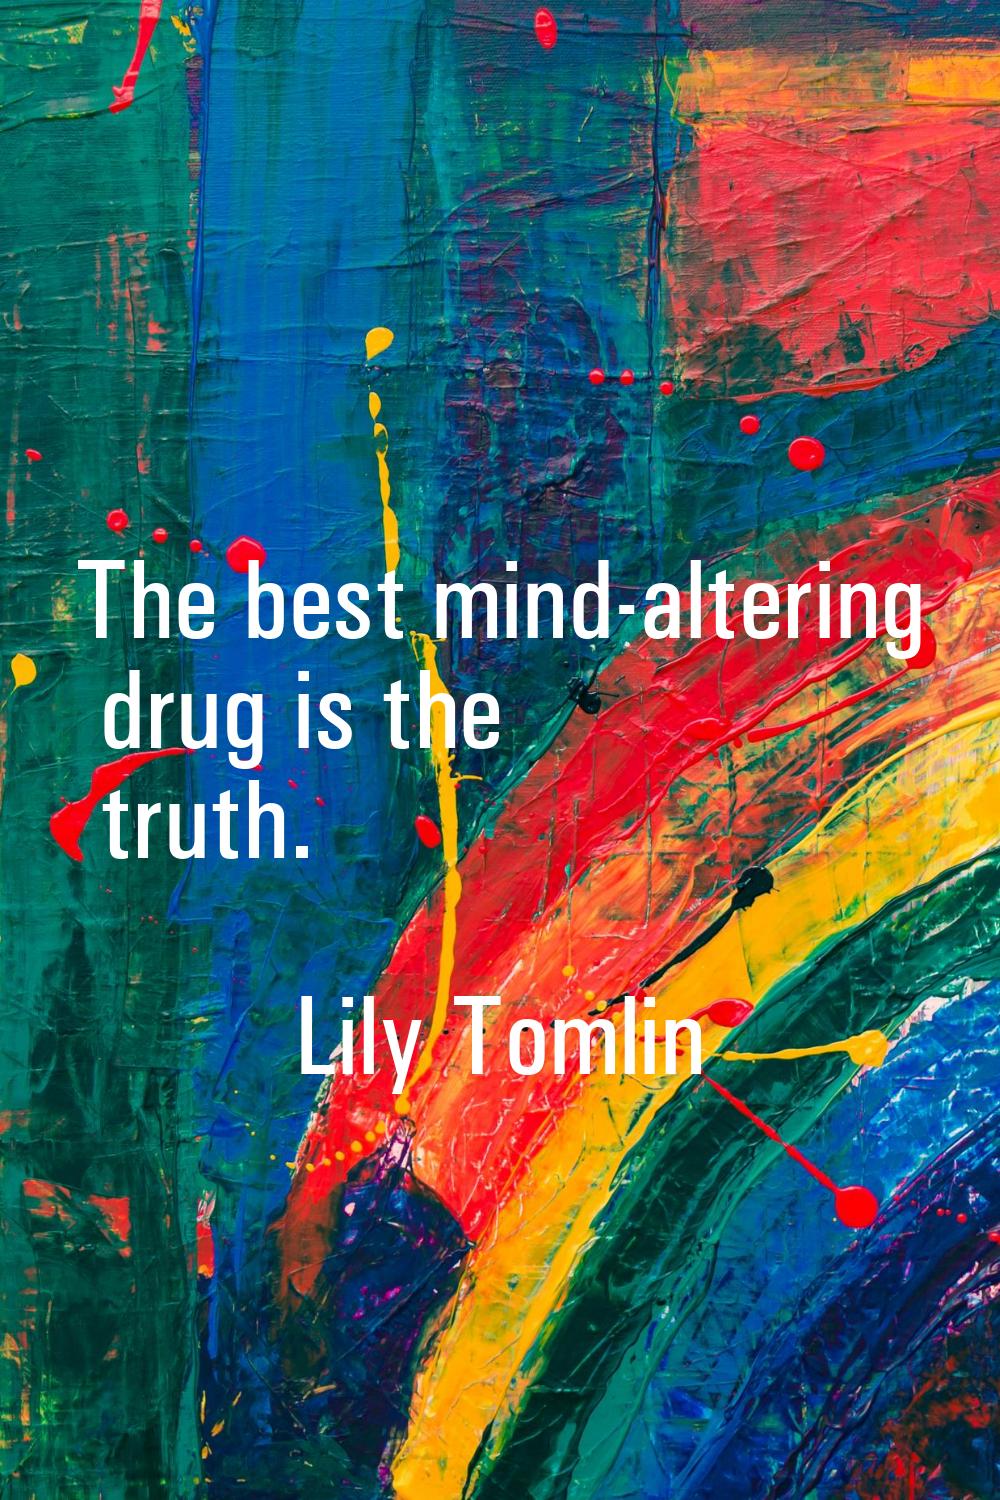 The best mind-altering drug is the truth.